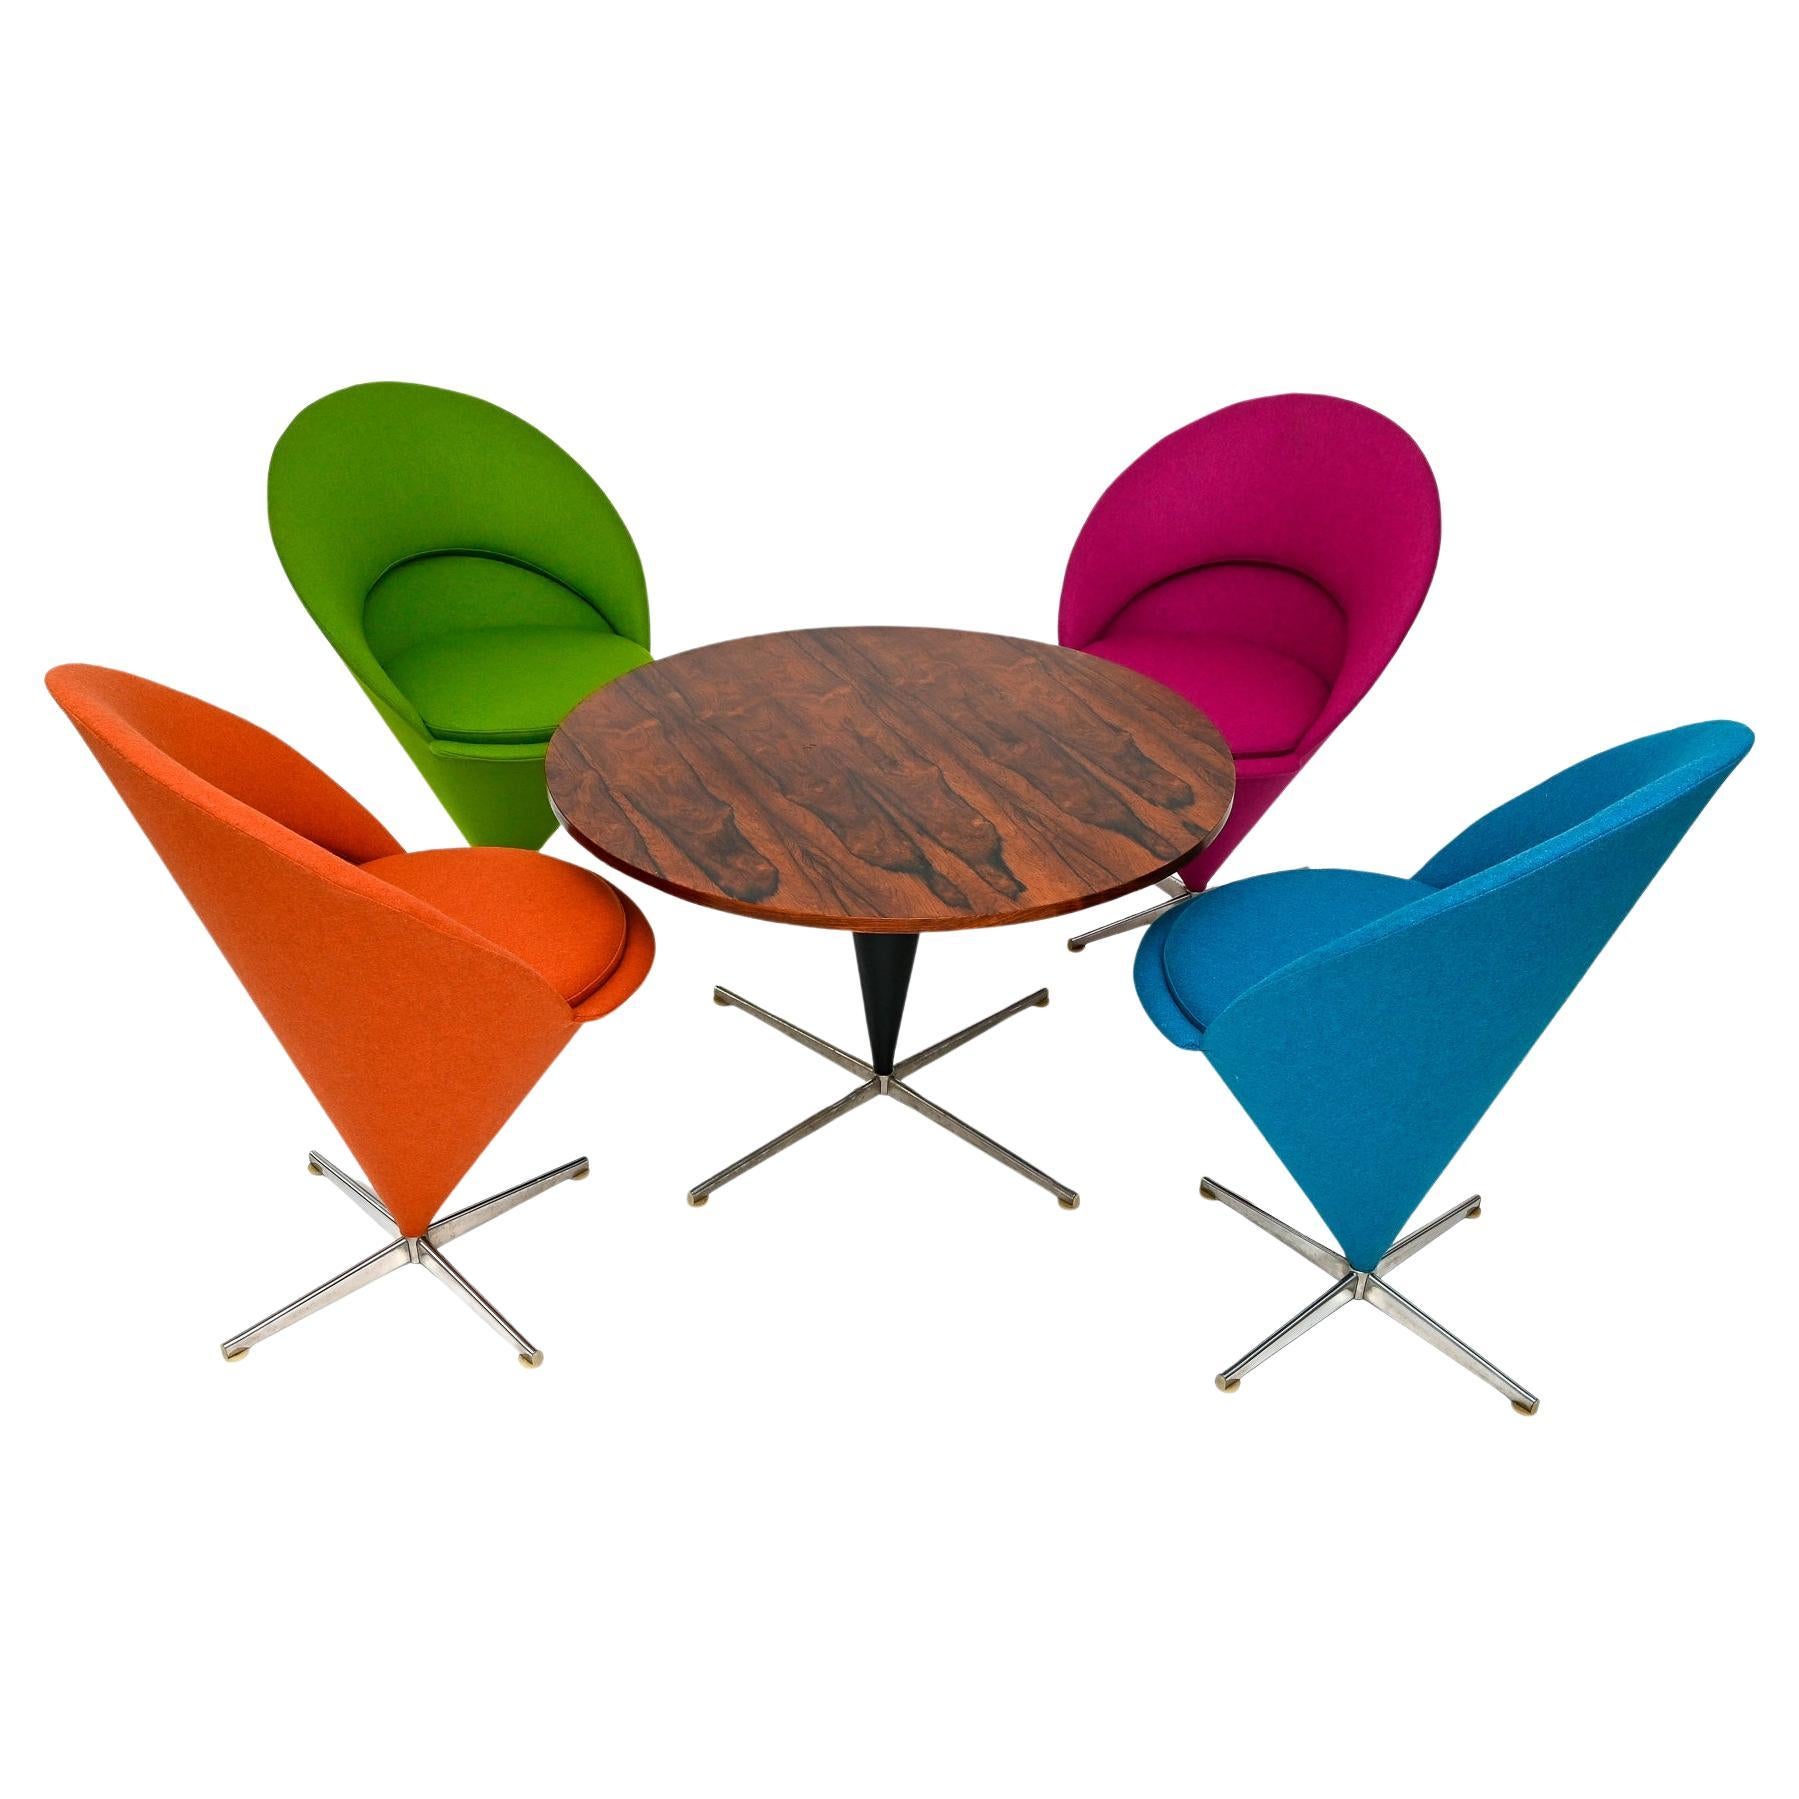 20th Century Verner Panton Seating Group Four Cone Chairs And Table